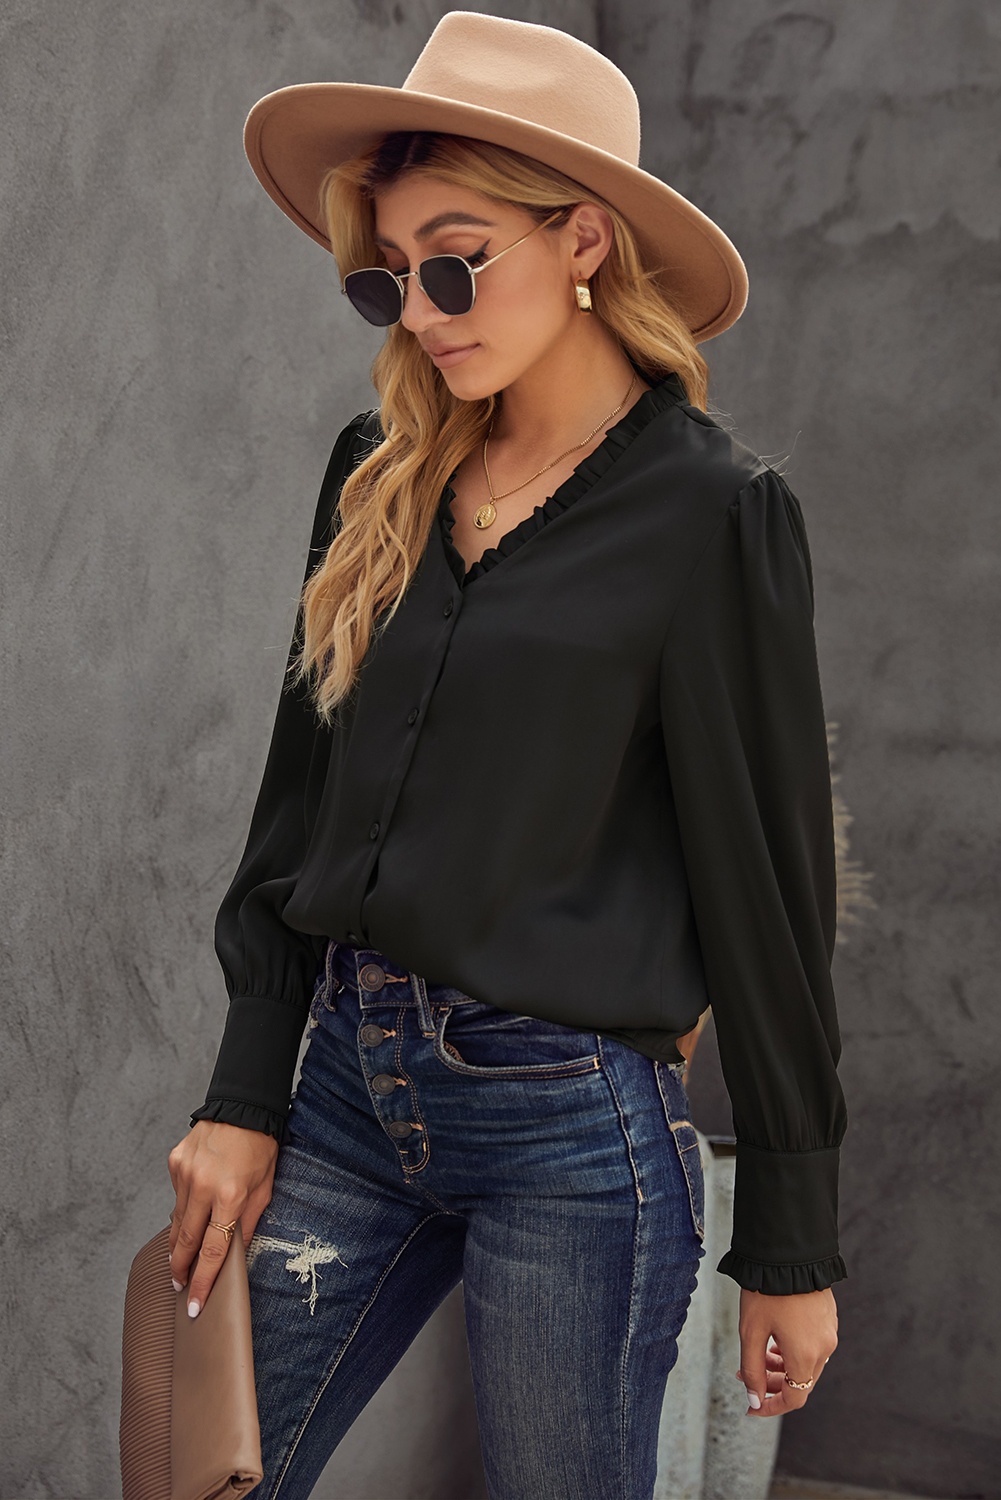 French Style Buttoned French Blouse | Women Blouses & Shirts